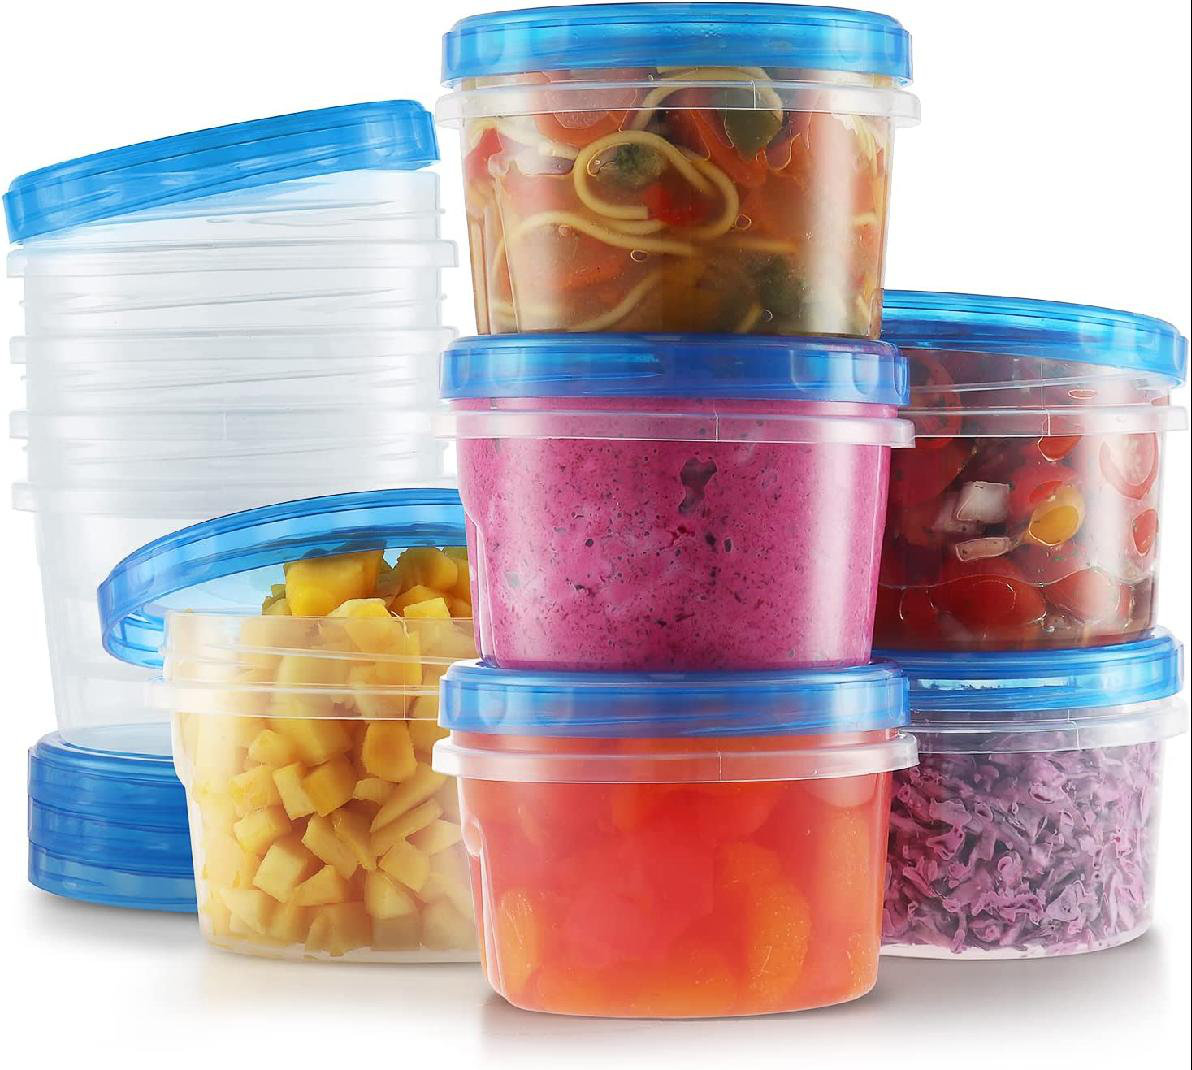 Prep & Savour Decklen Airtight Food Storage Containers With Lids